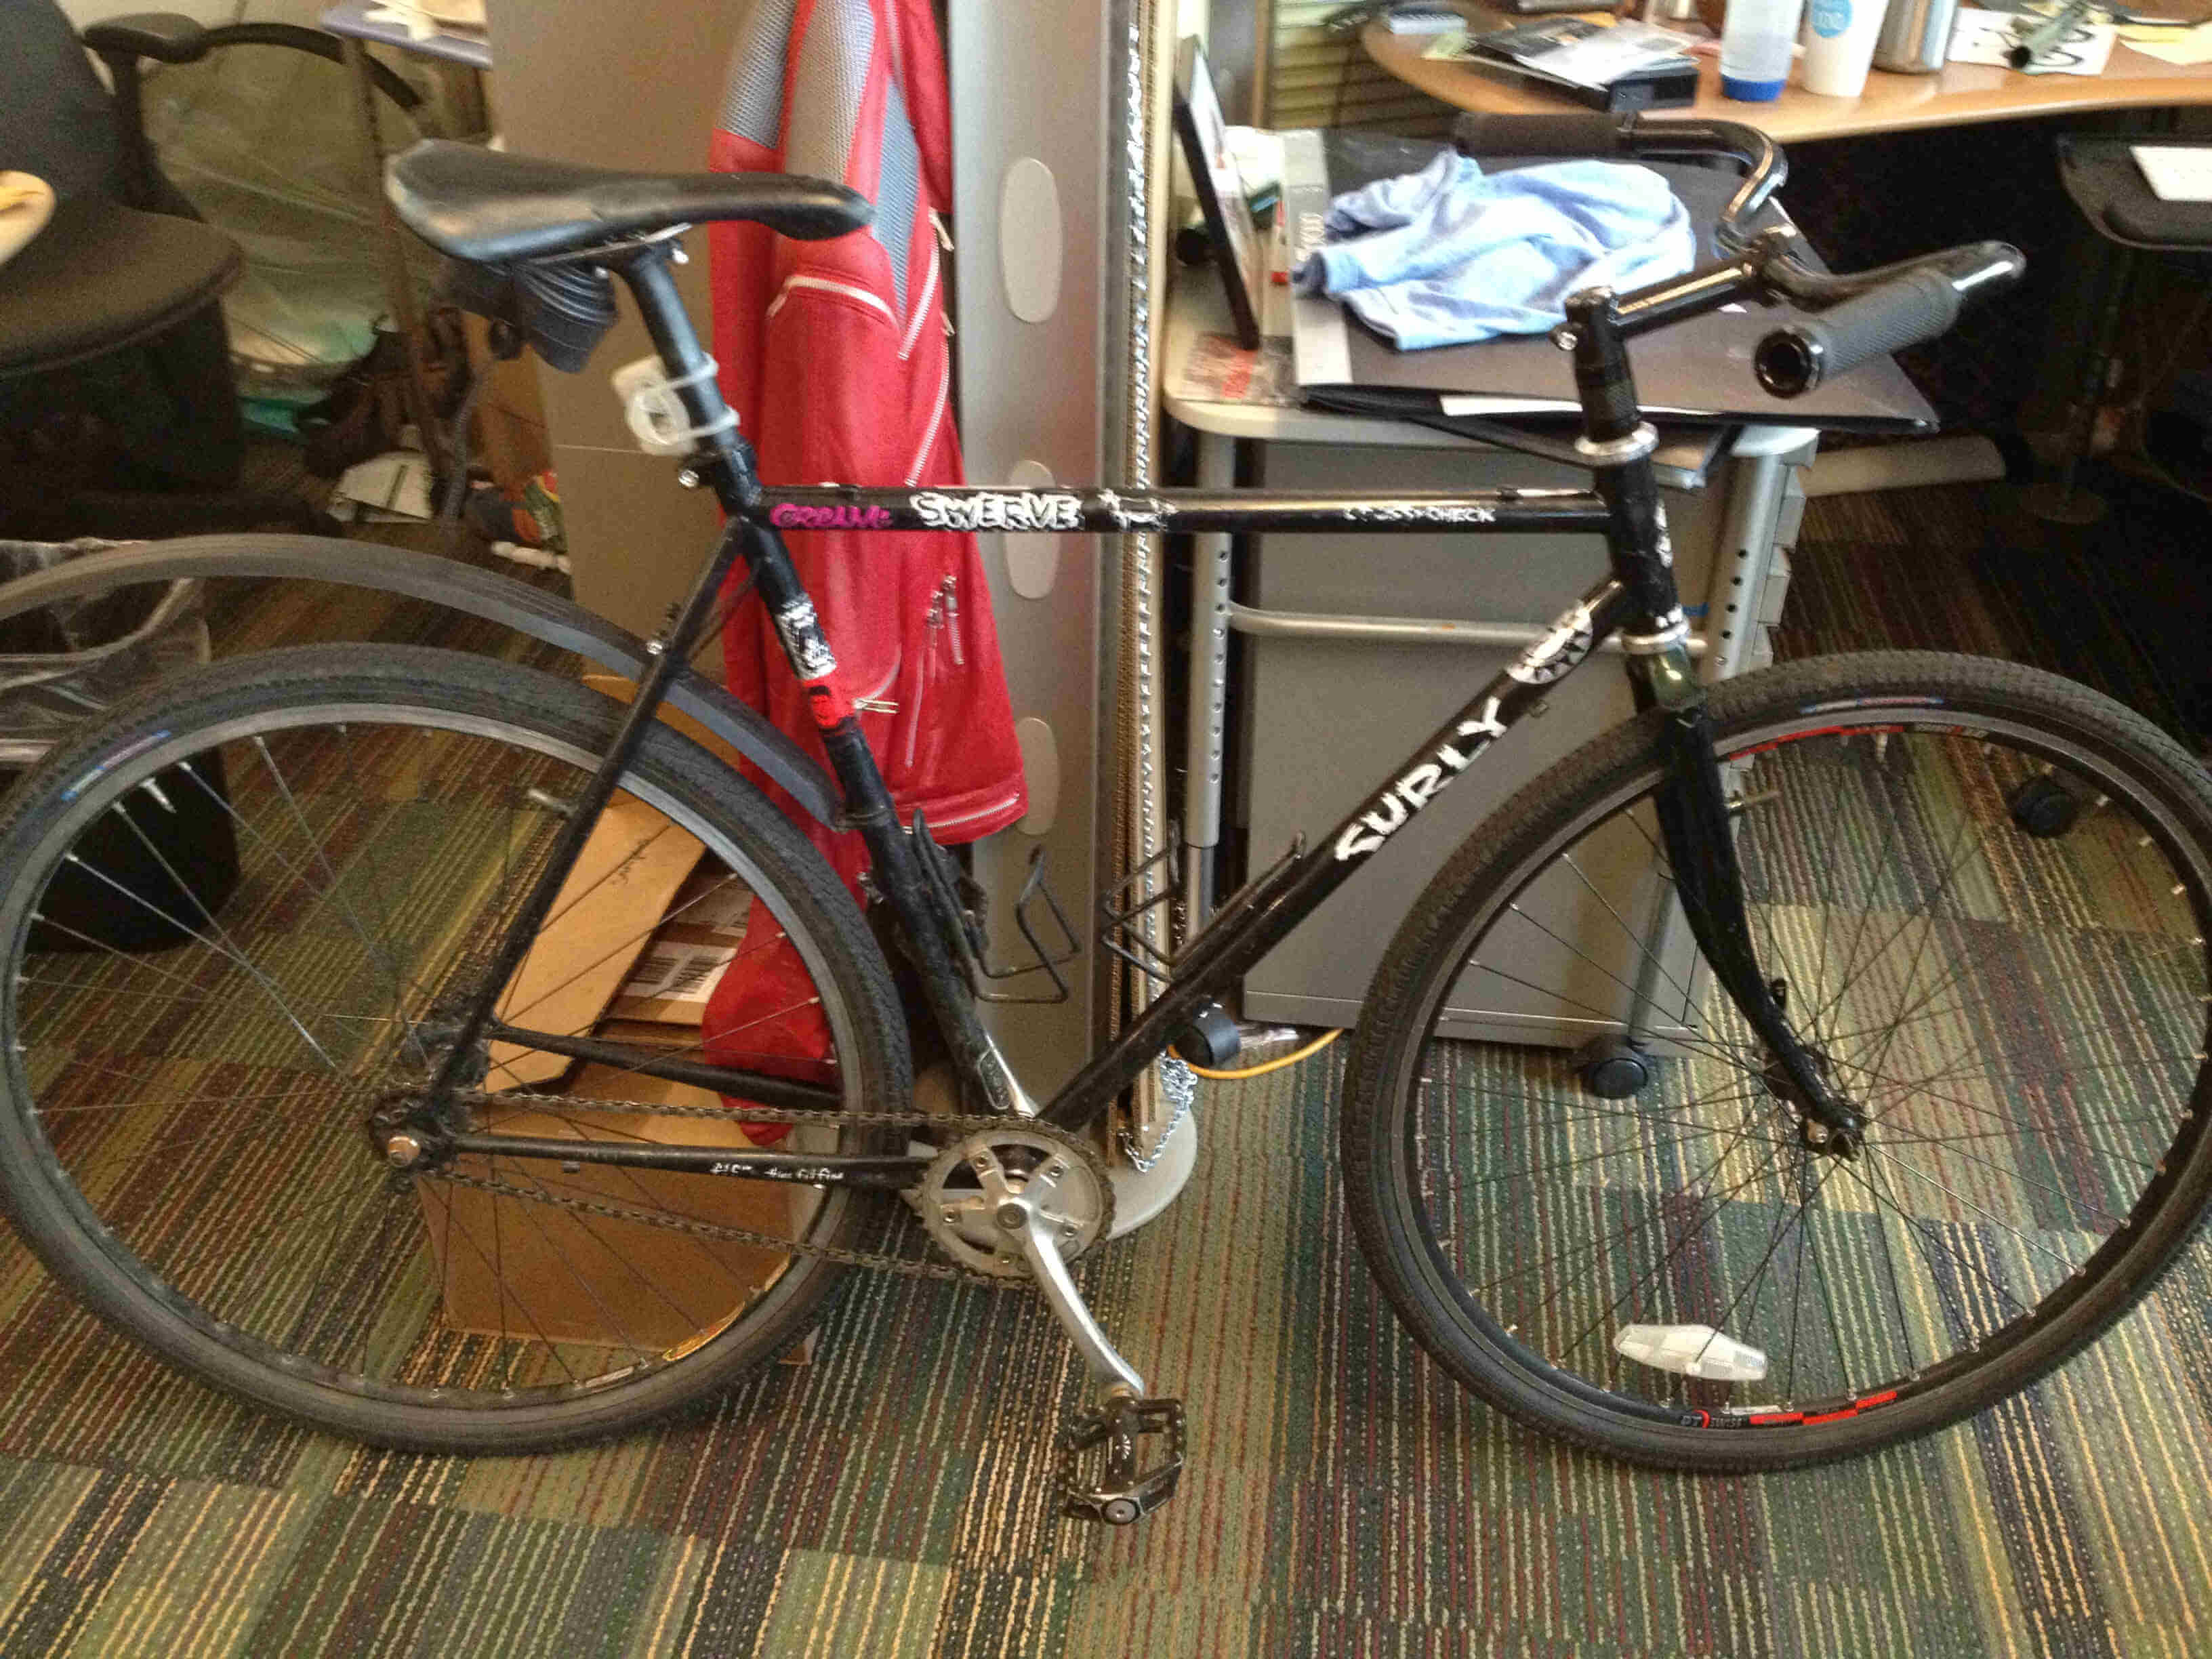 Right side view of a black Surly Cross Check bike, leaning on the end of a cubicle wall, in an office